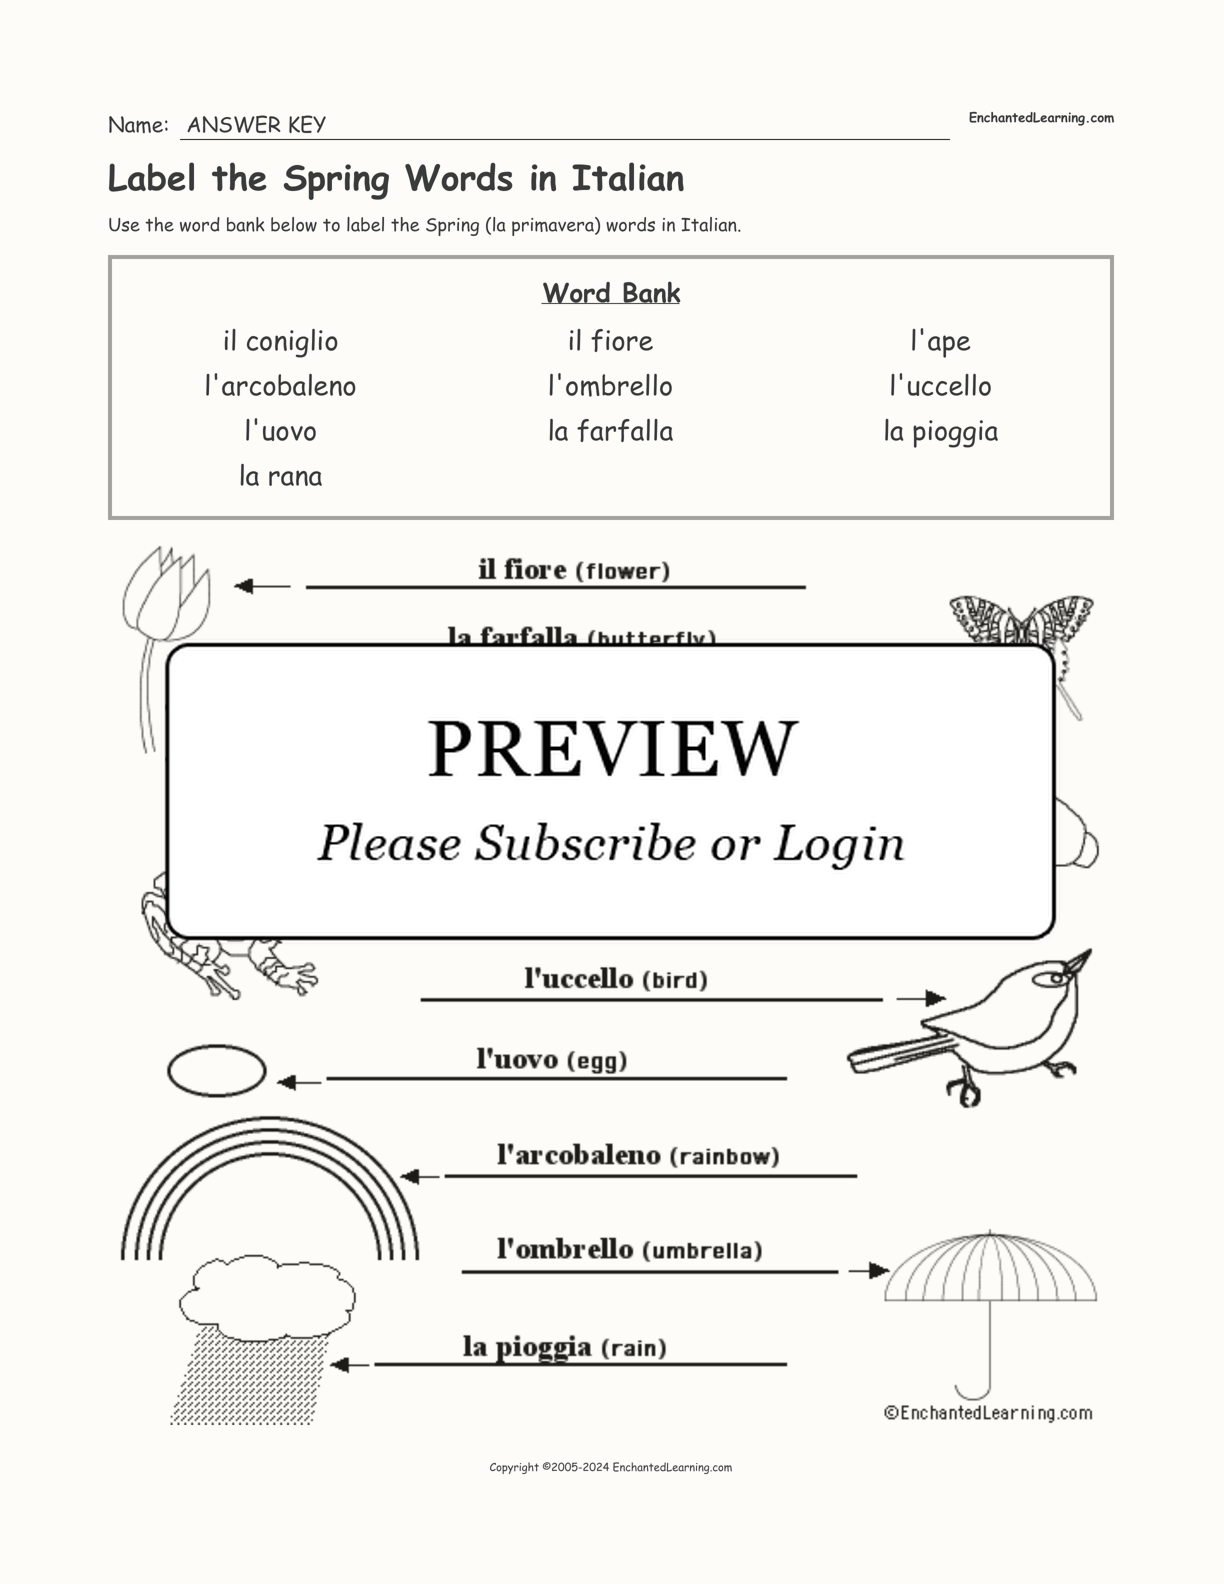 Label the Spring Words in Italian interactive worksheet page 2